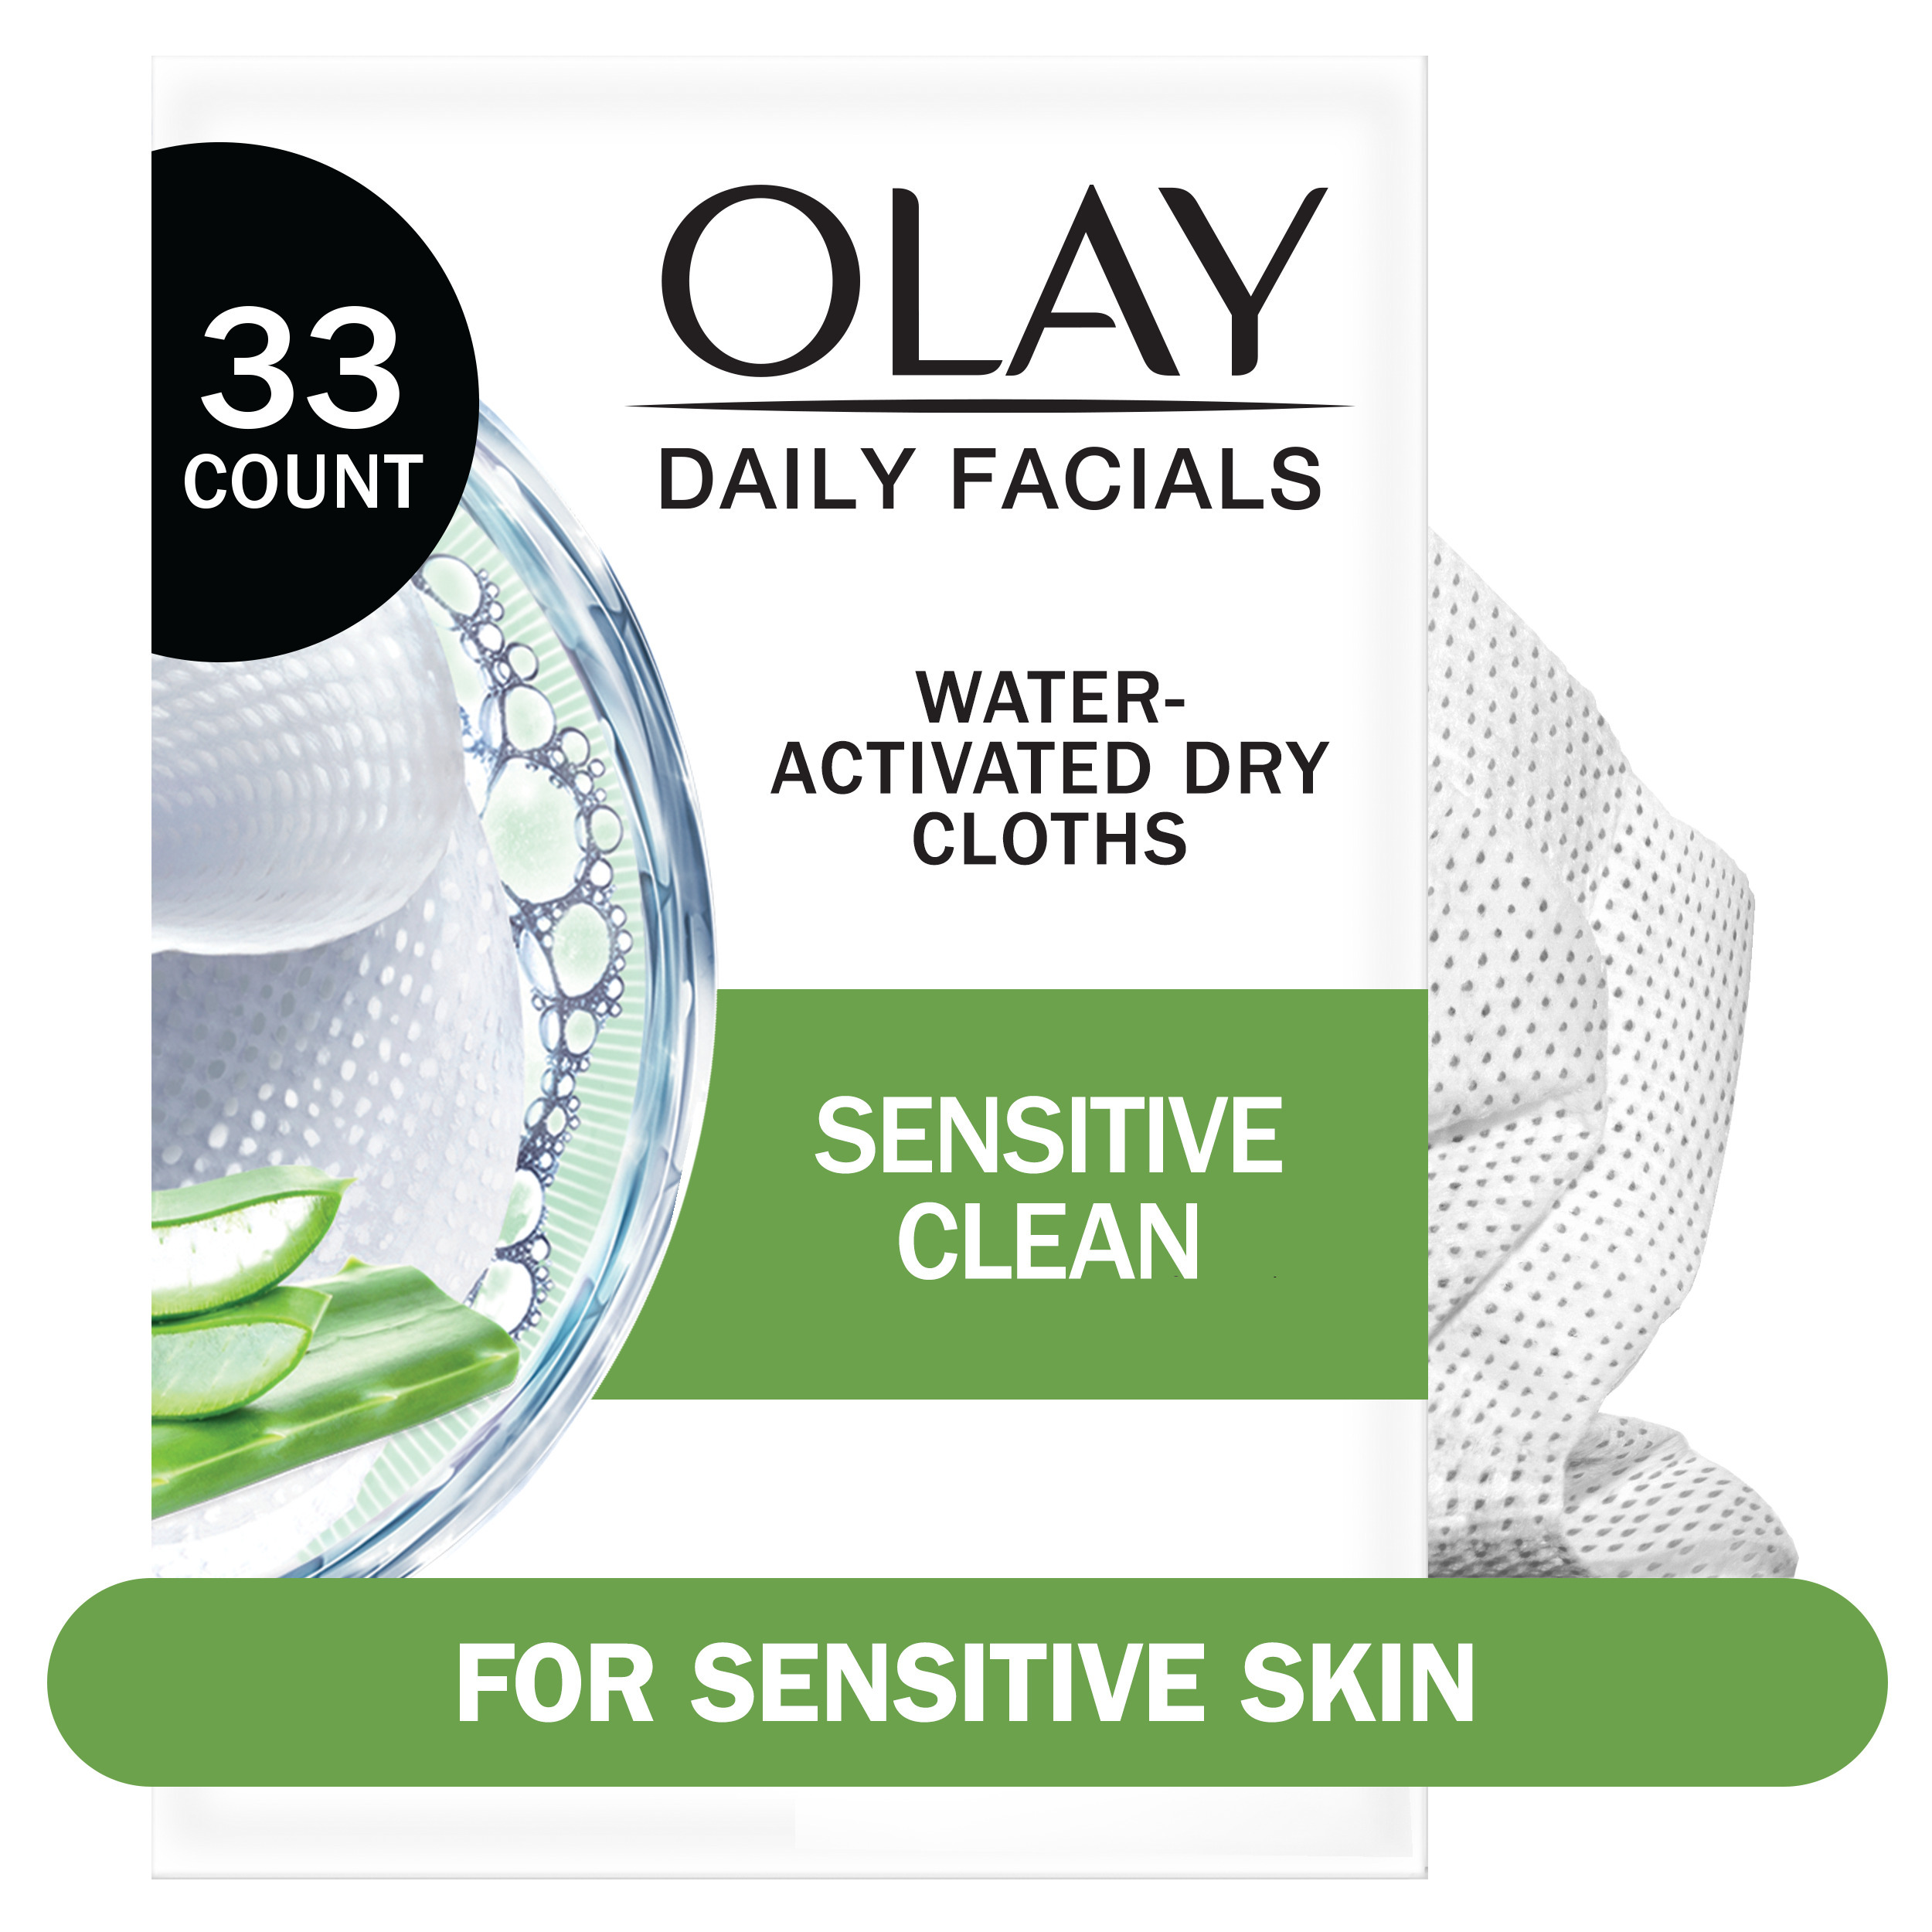 Olay Daily Facials Sensitive Cleansing Cloths, Fragrance-Free, 33 Count - image 1 of 10